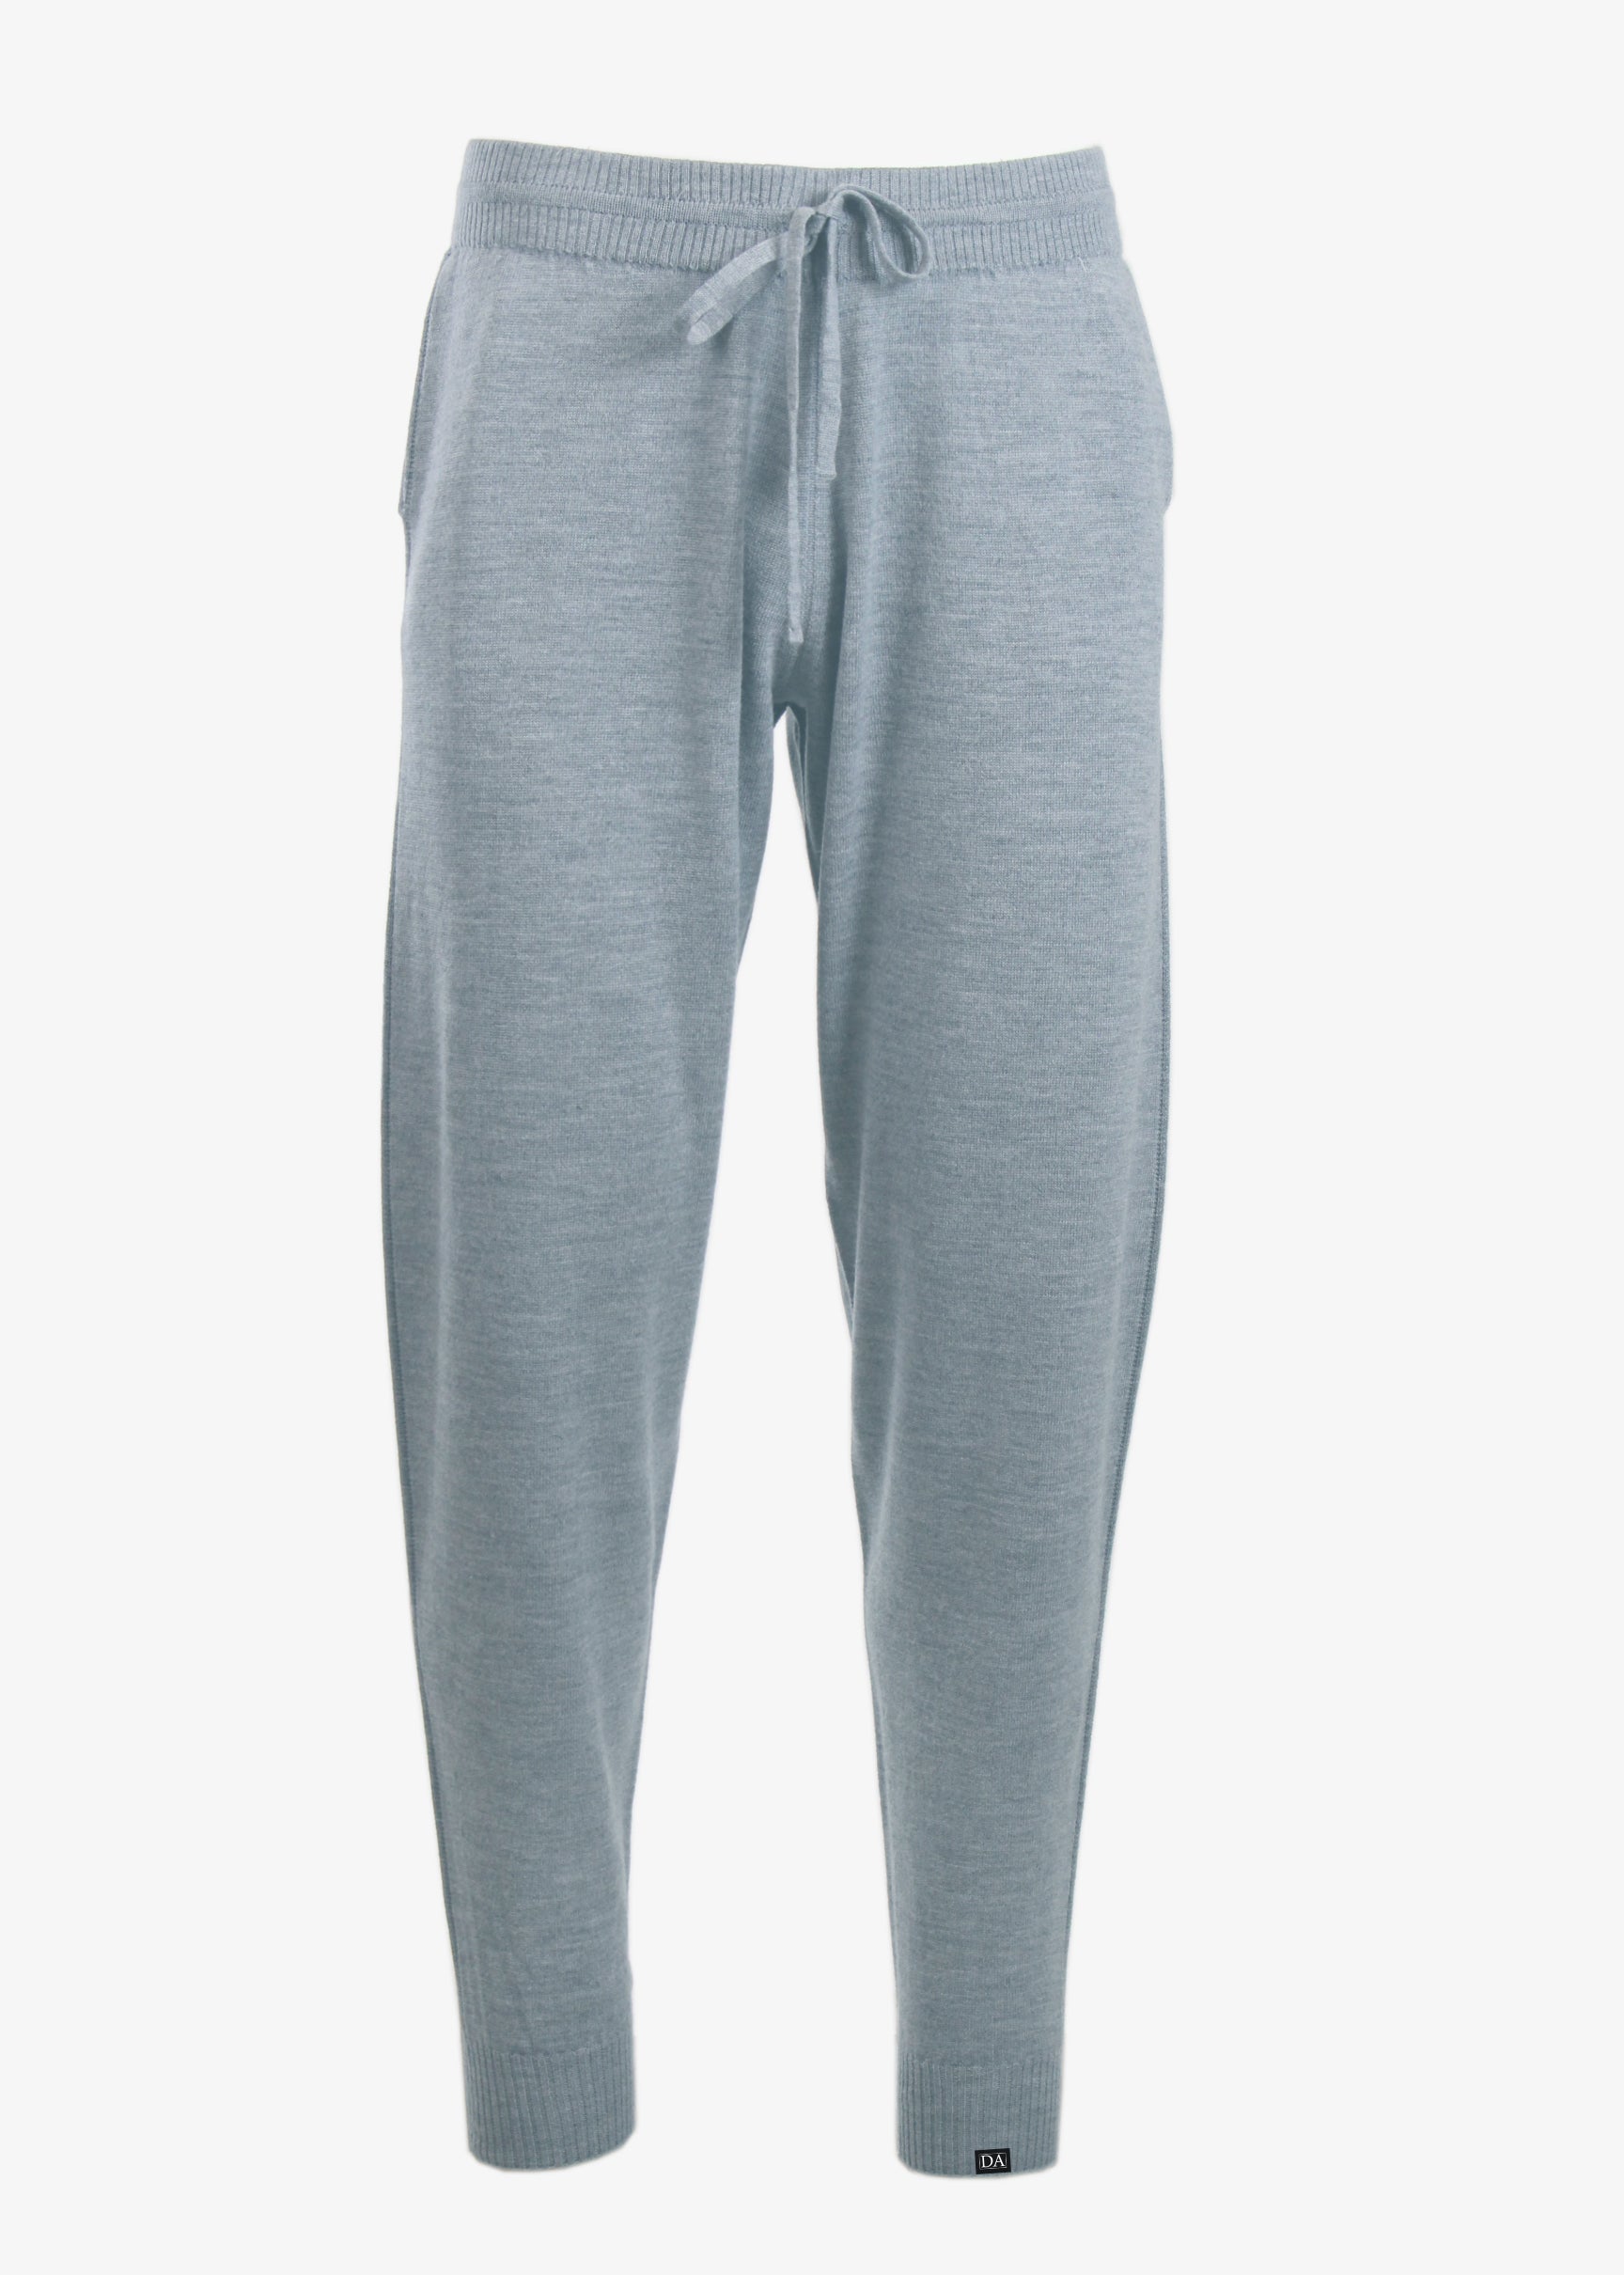 Sycamore Luxury Lounging Pants